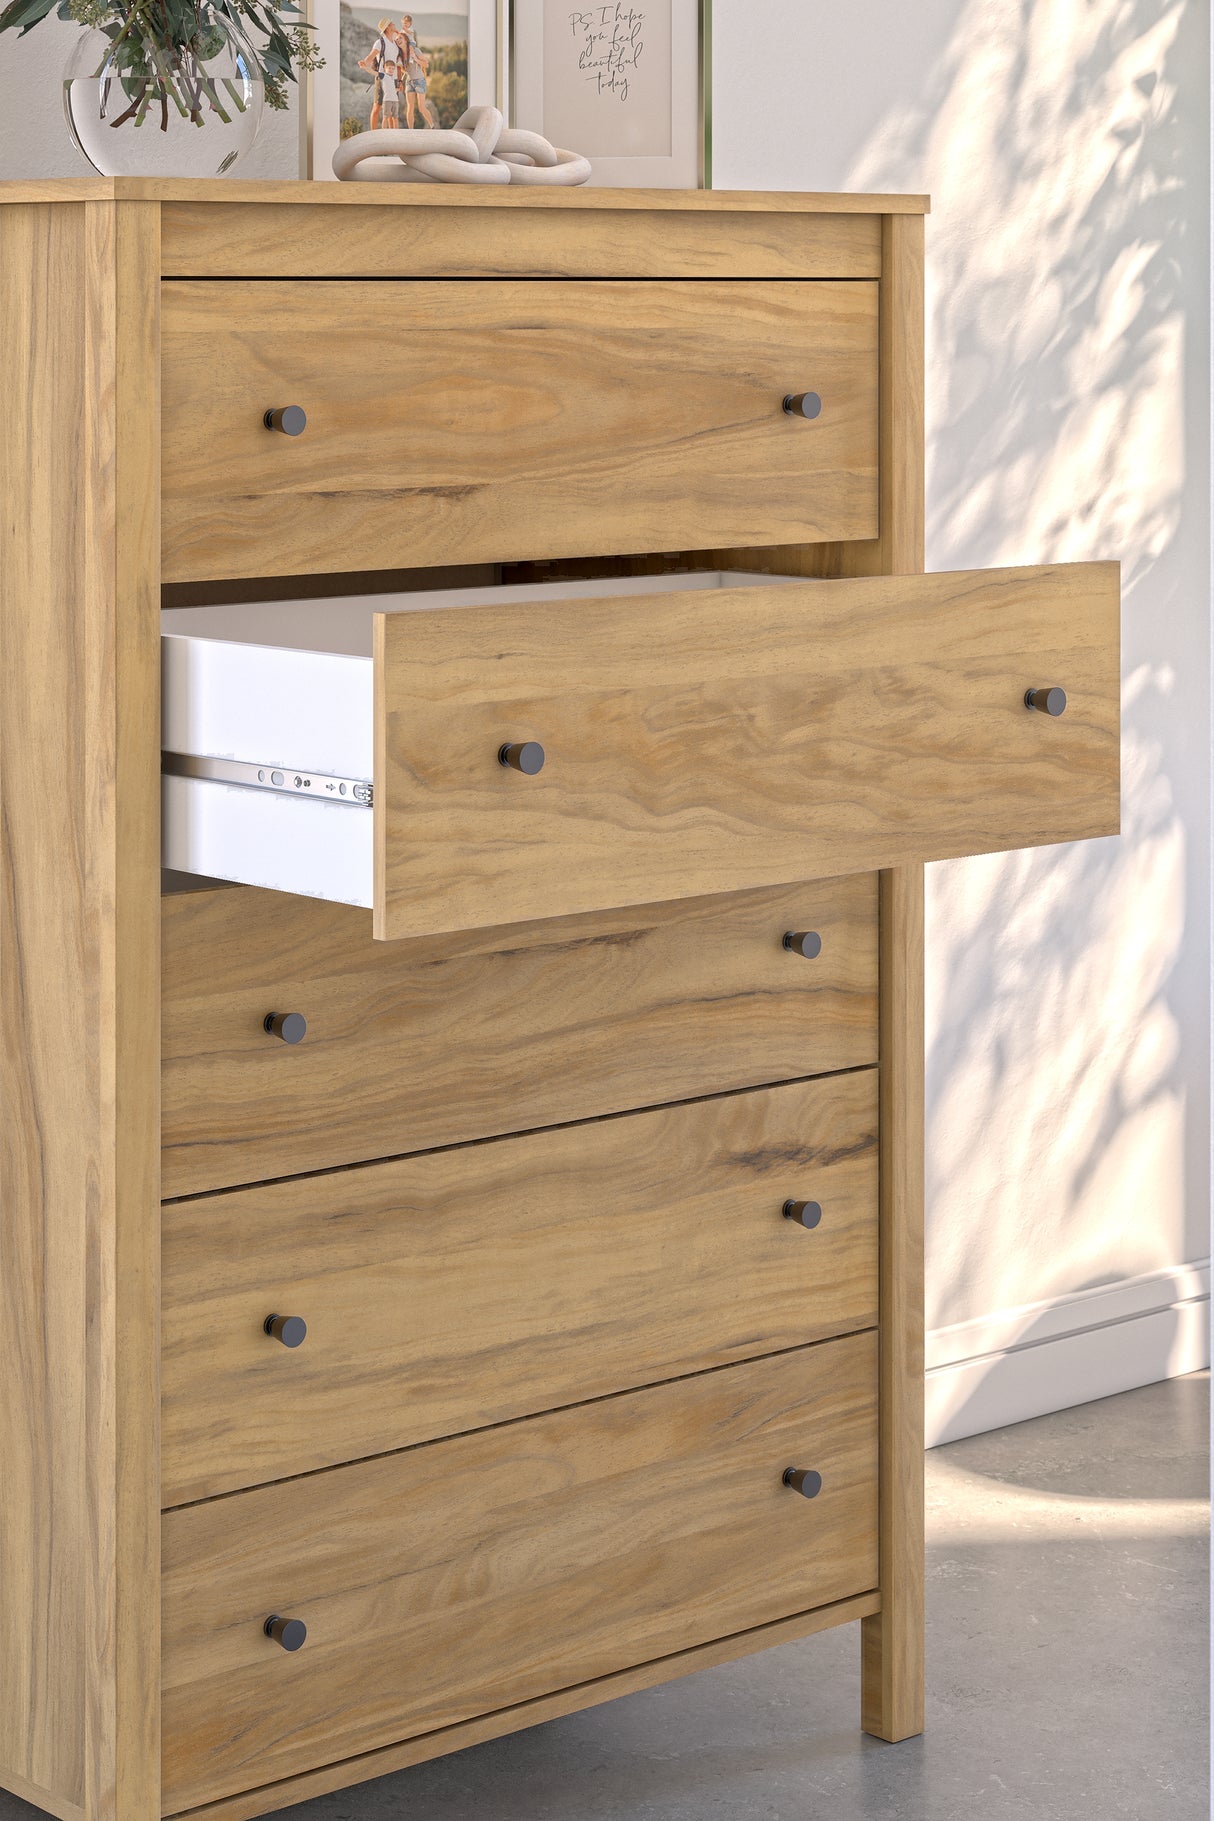 Bermacy Light Brown Chest of Drawers - EB1760-245 - Luna Furniture